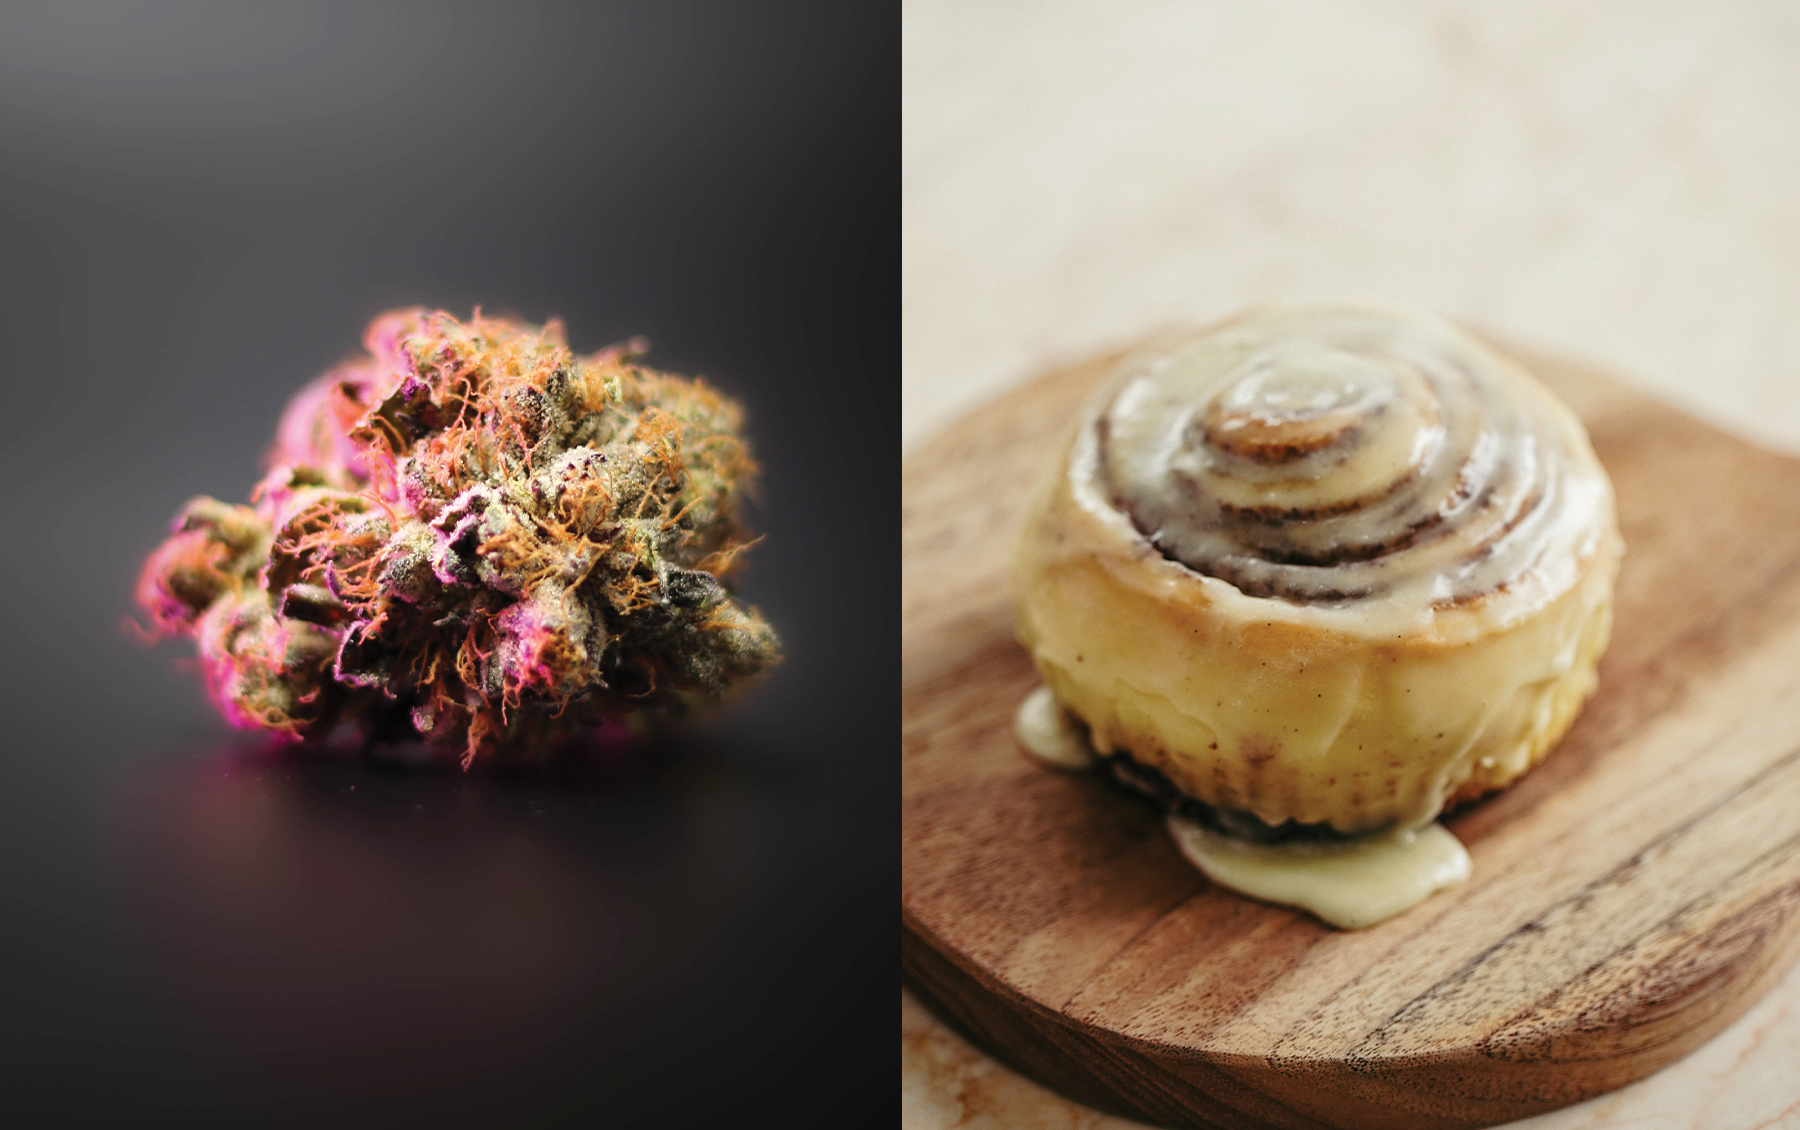 Top 5 Cannabis Accessories To Celebrate National Sticky Buns Day